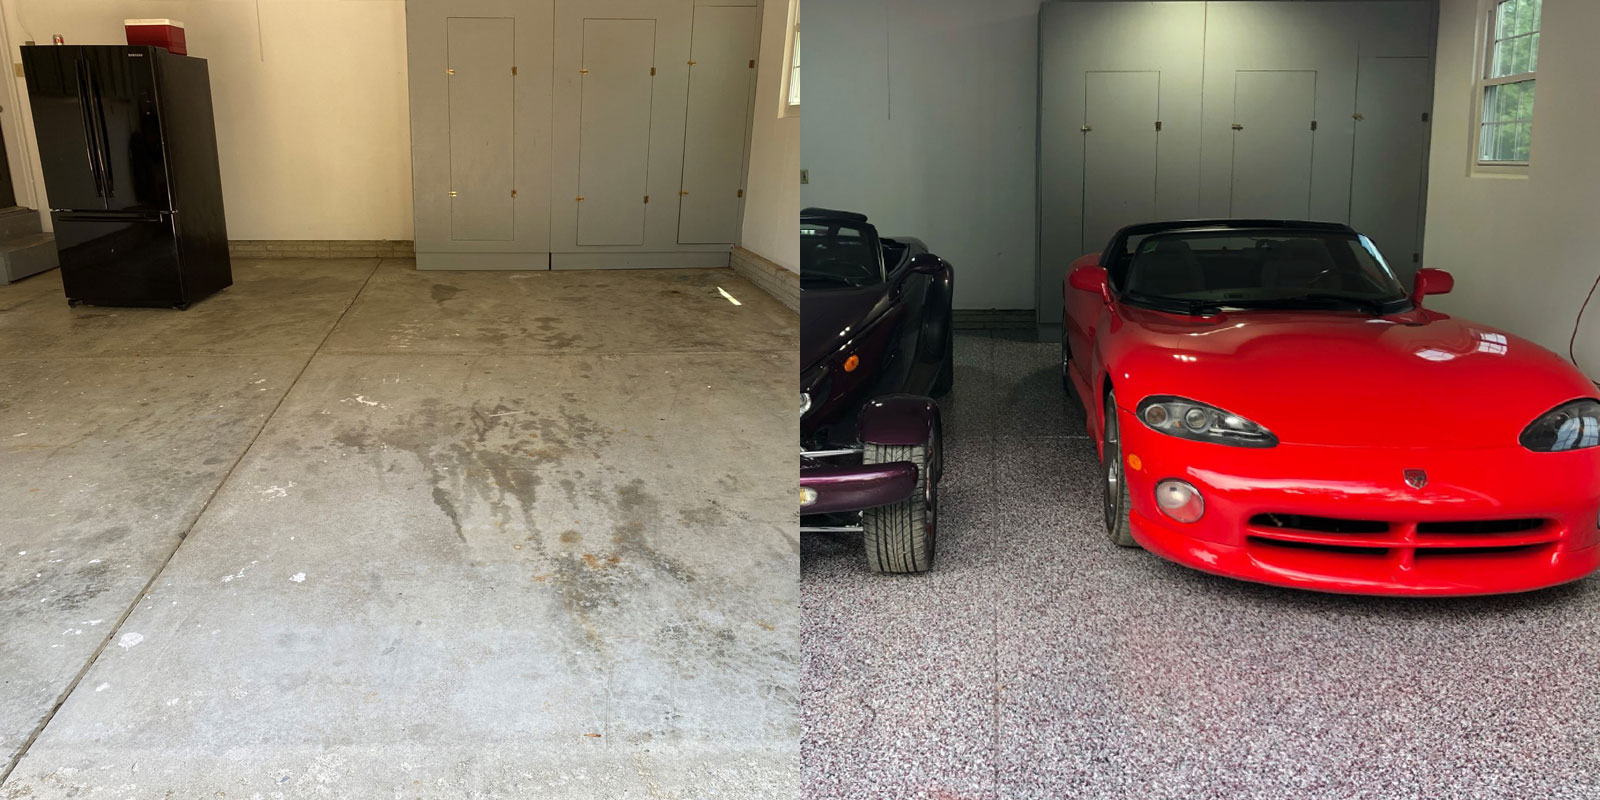 epoxy-flooring-before-and-after-1